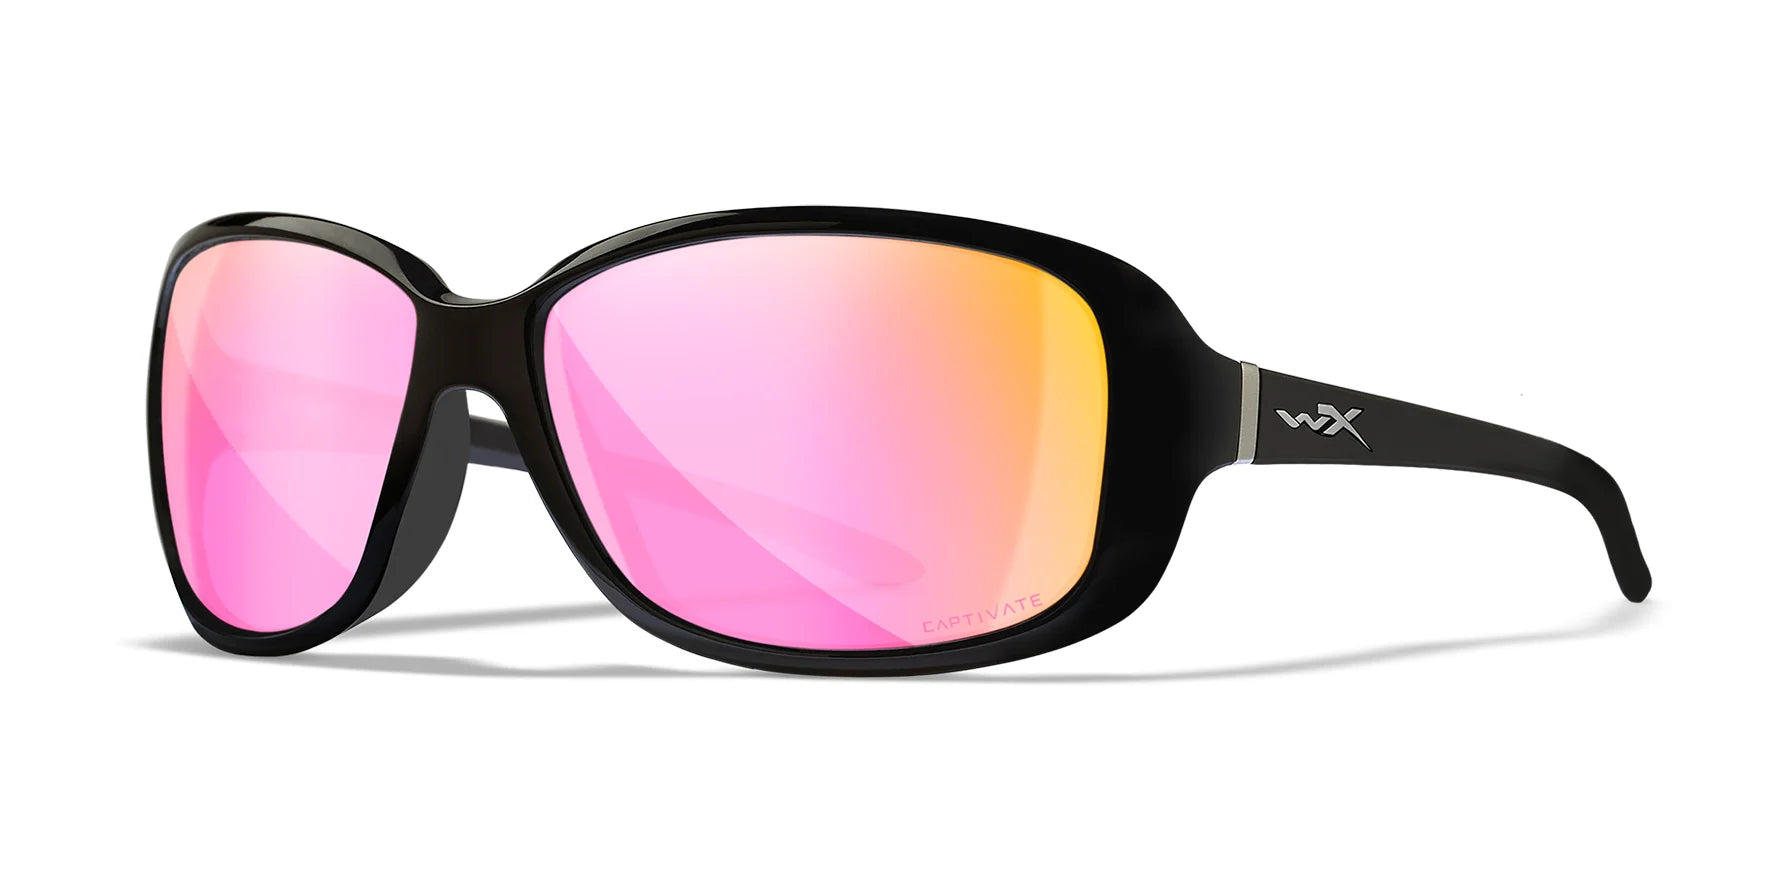 Wiley X AFFINITY Sunglasses Gloss Black / CAPTIVATE™ Polarized Rose Gold Mirror